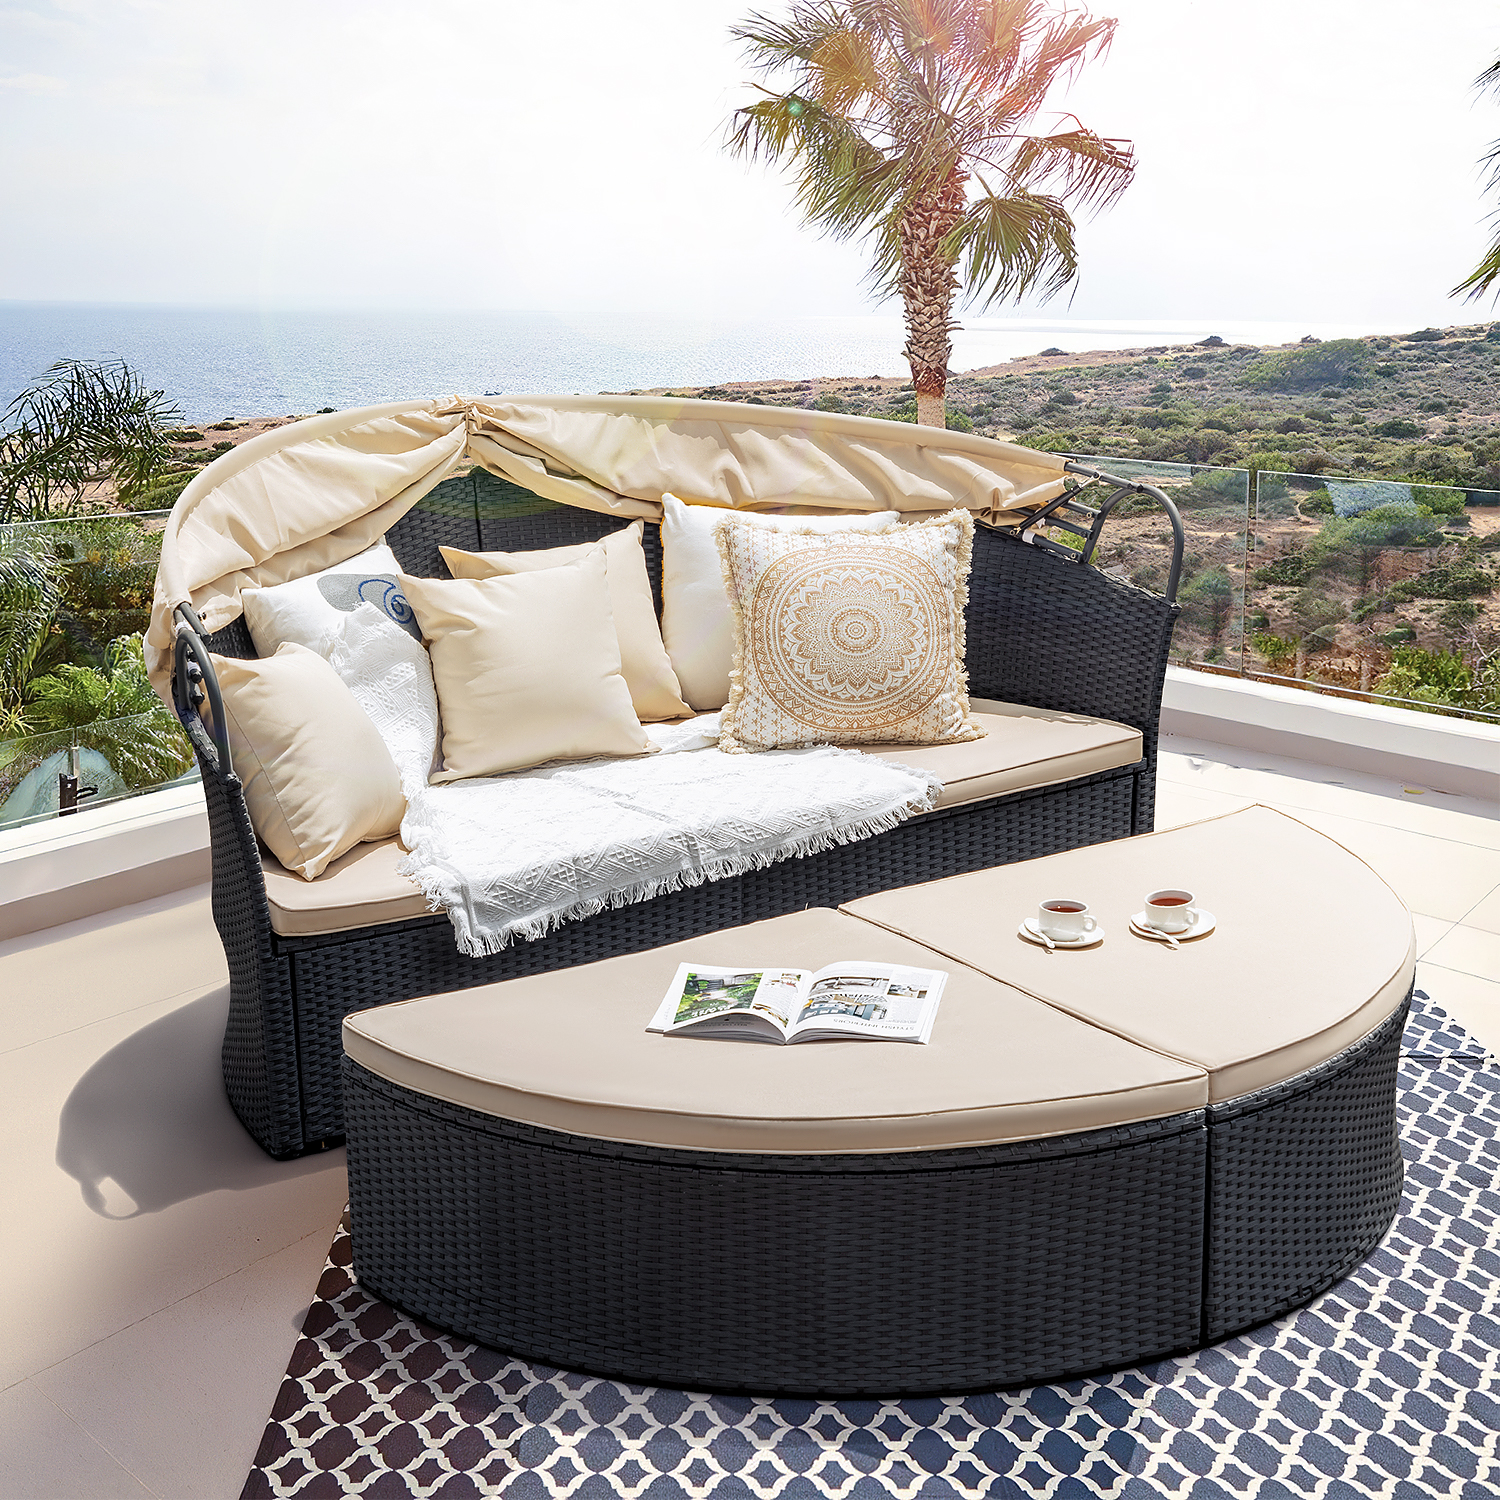 Homall Outdoor Daybed with Retractable Canopy Sectional Rattan Round Bed for Patio, Black & Beige - image 3 of 7